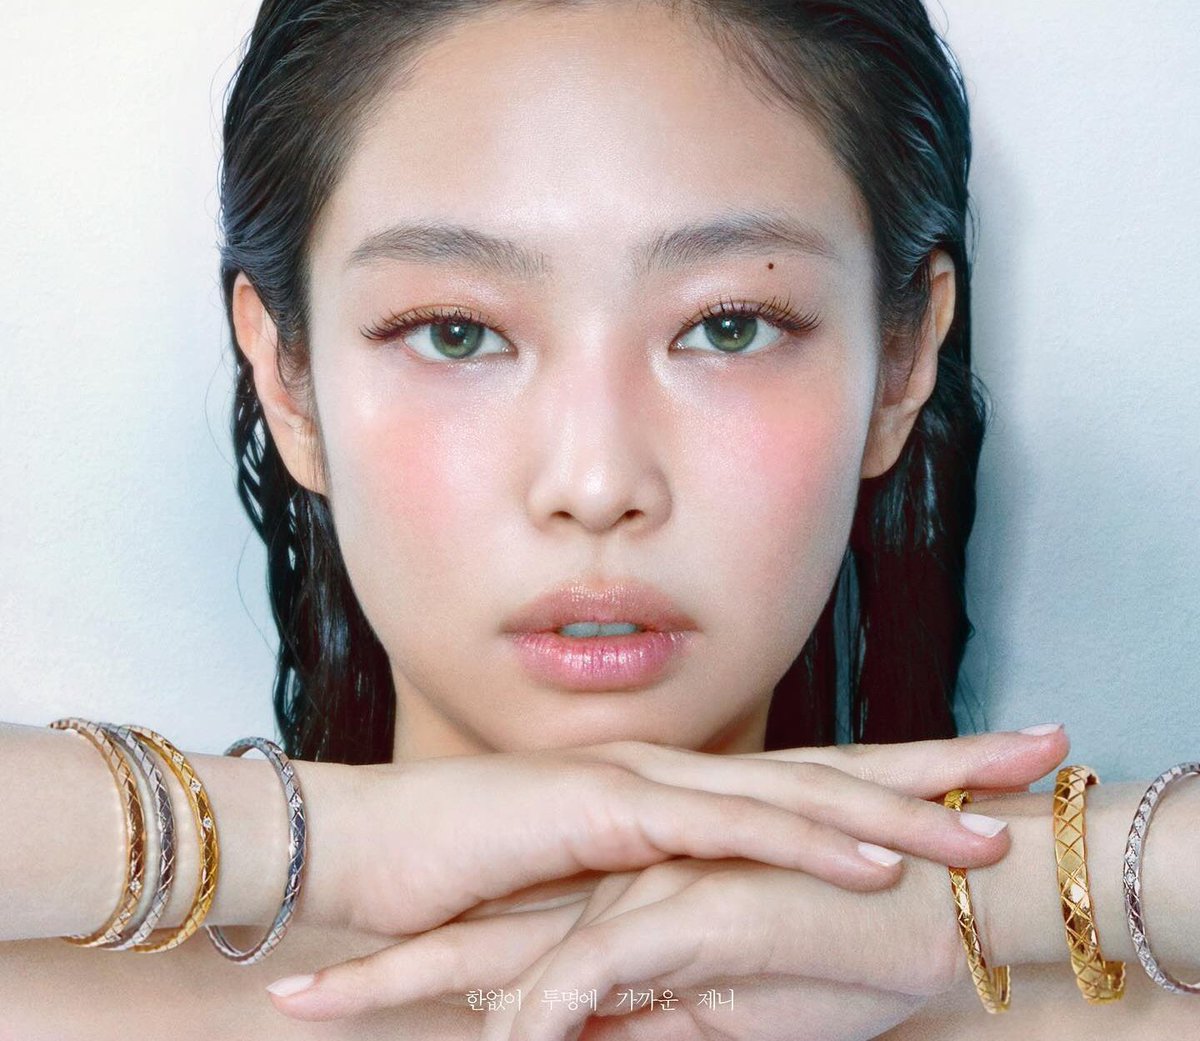 Jennie has reportedly donated 100 million won to Habitat Korea, an International Housing Welfare non-profit organization to help the Korean Youth in the name of her fanclub, 'BLINK'.